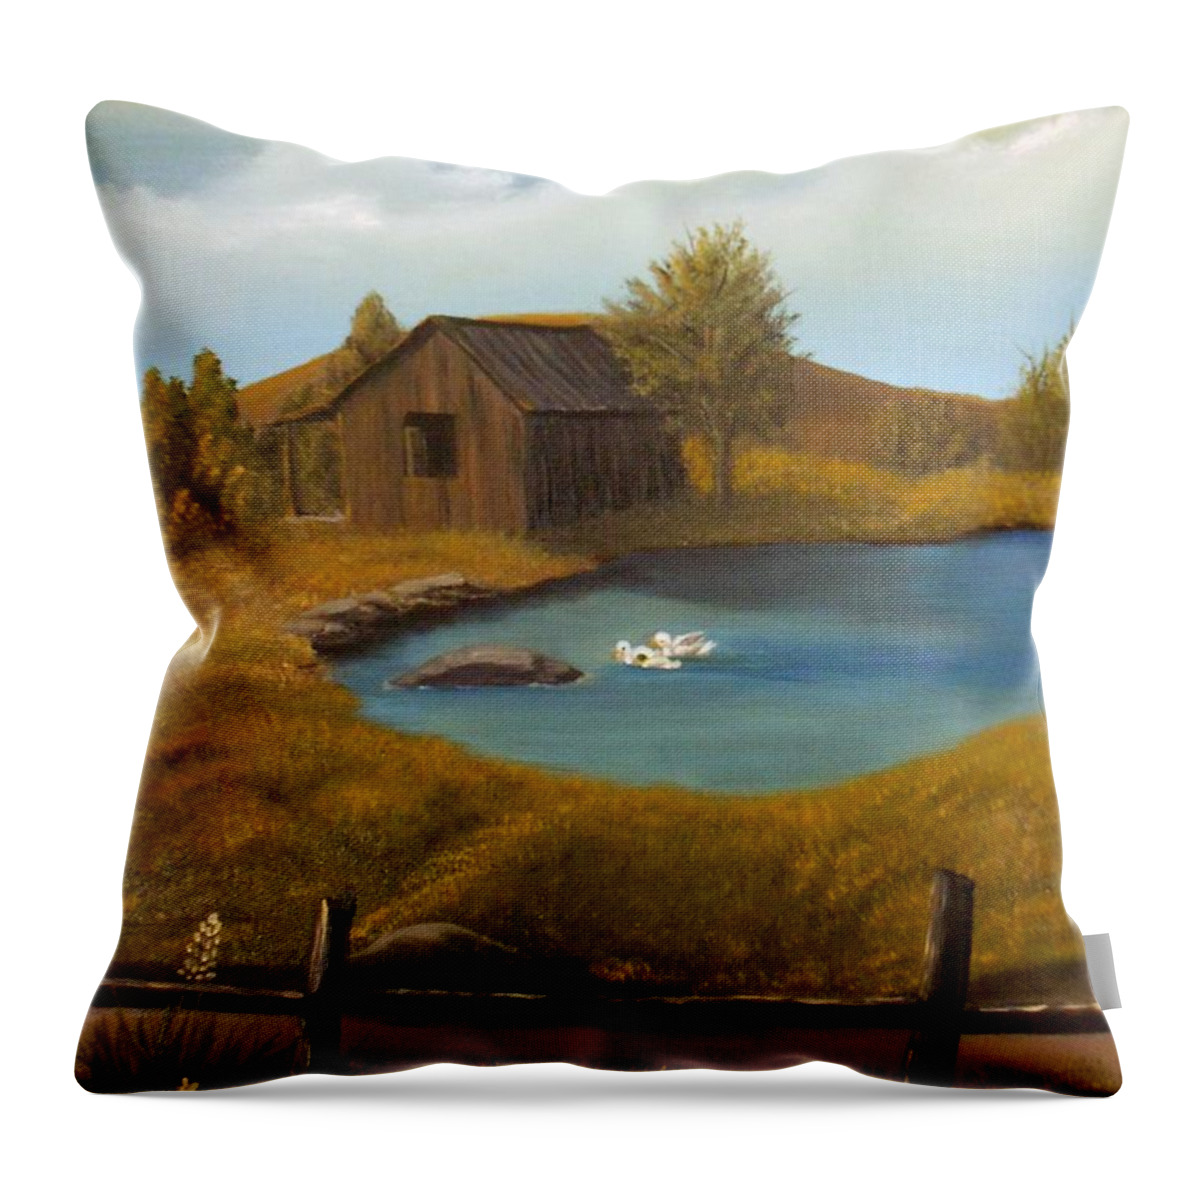 Evening Throw Pillow featuring the painting Evening Solitude by Sheri Keith